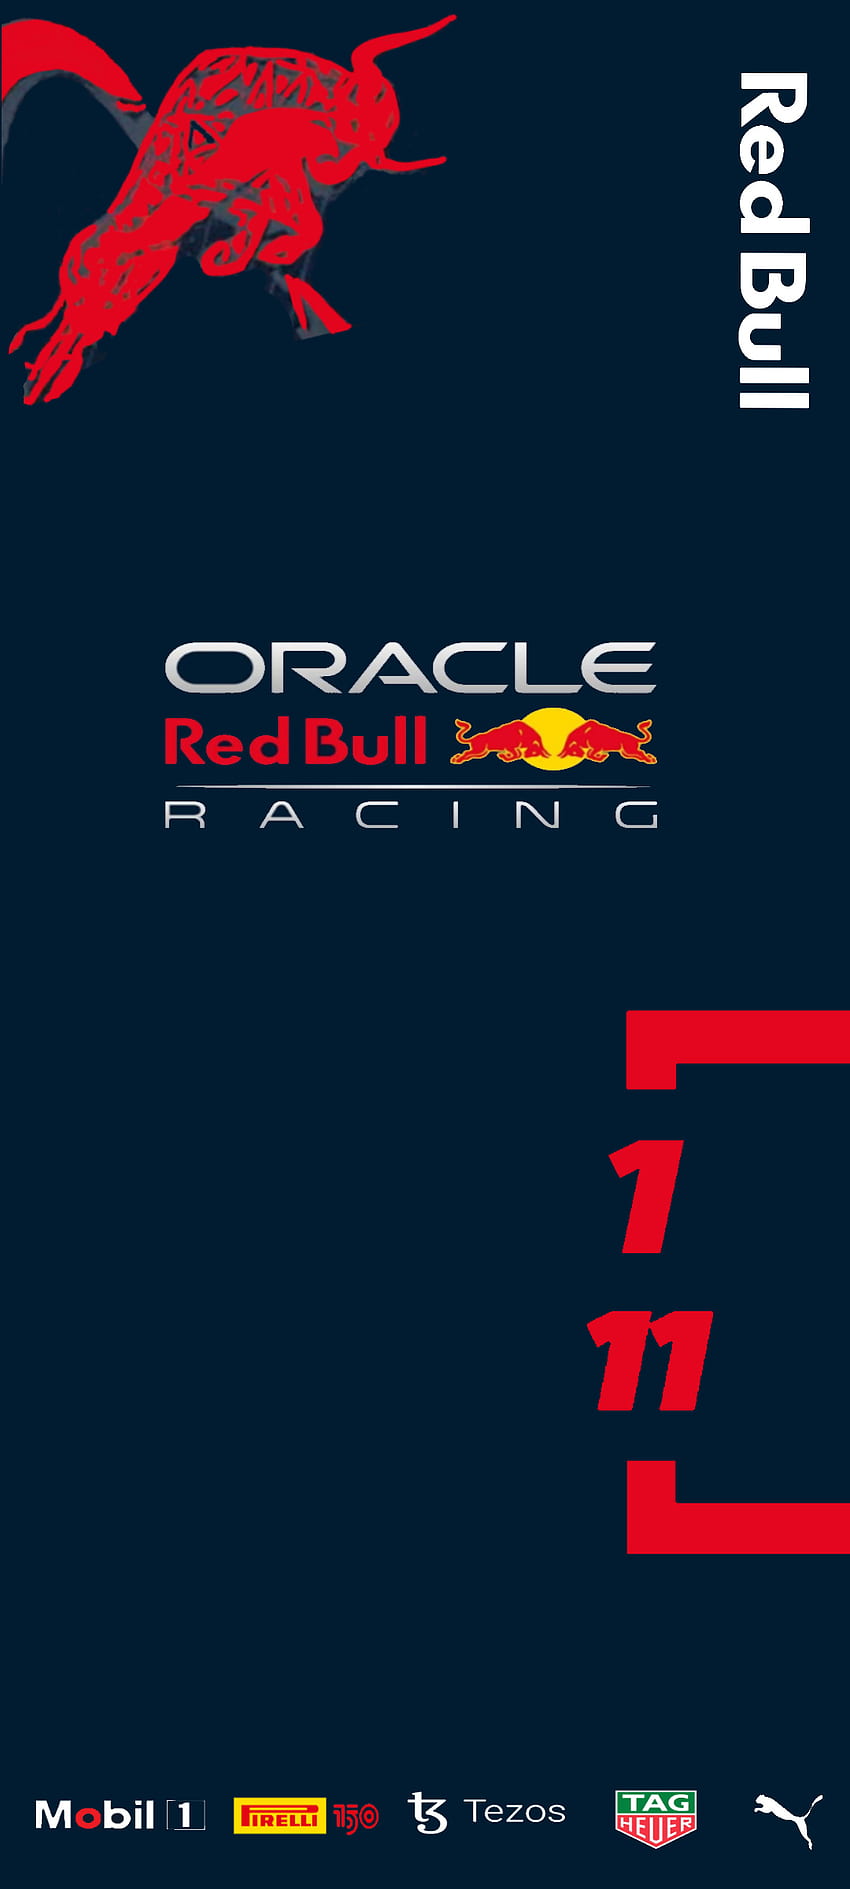 1280x768px, 720P Free download | Red Bull Racing, ChecoPerez ...